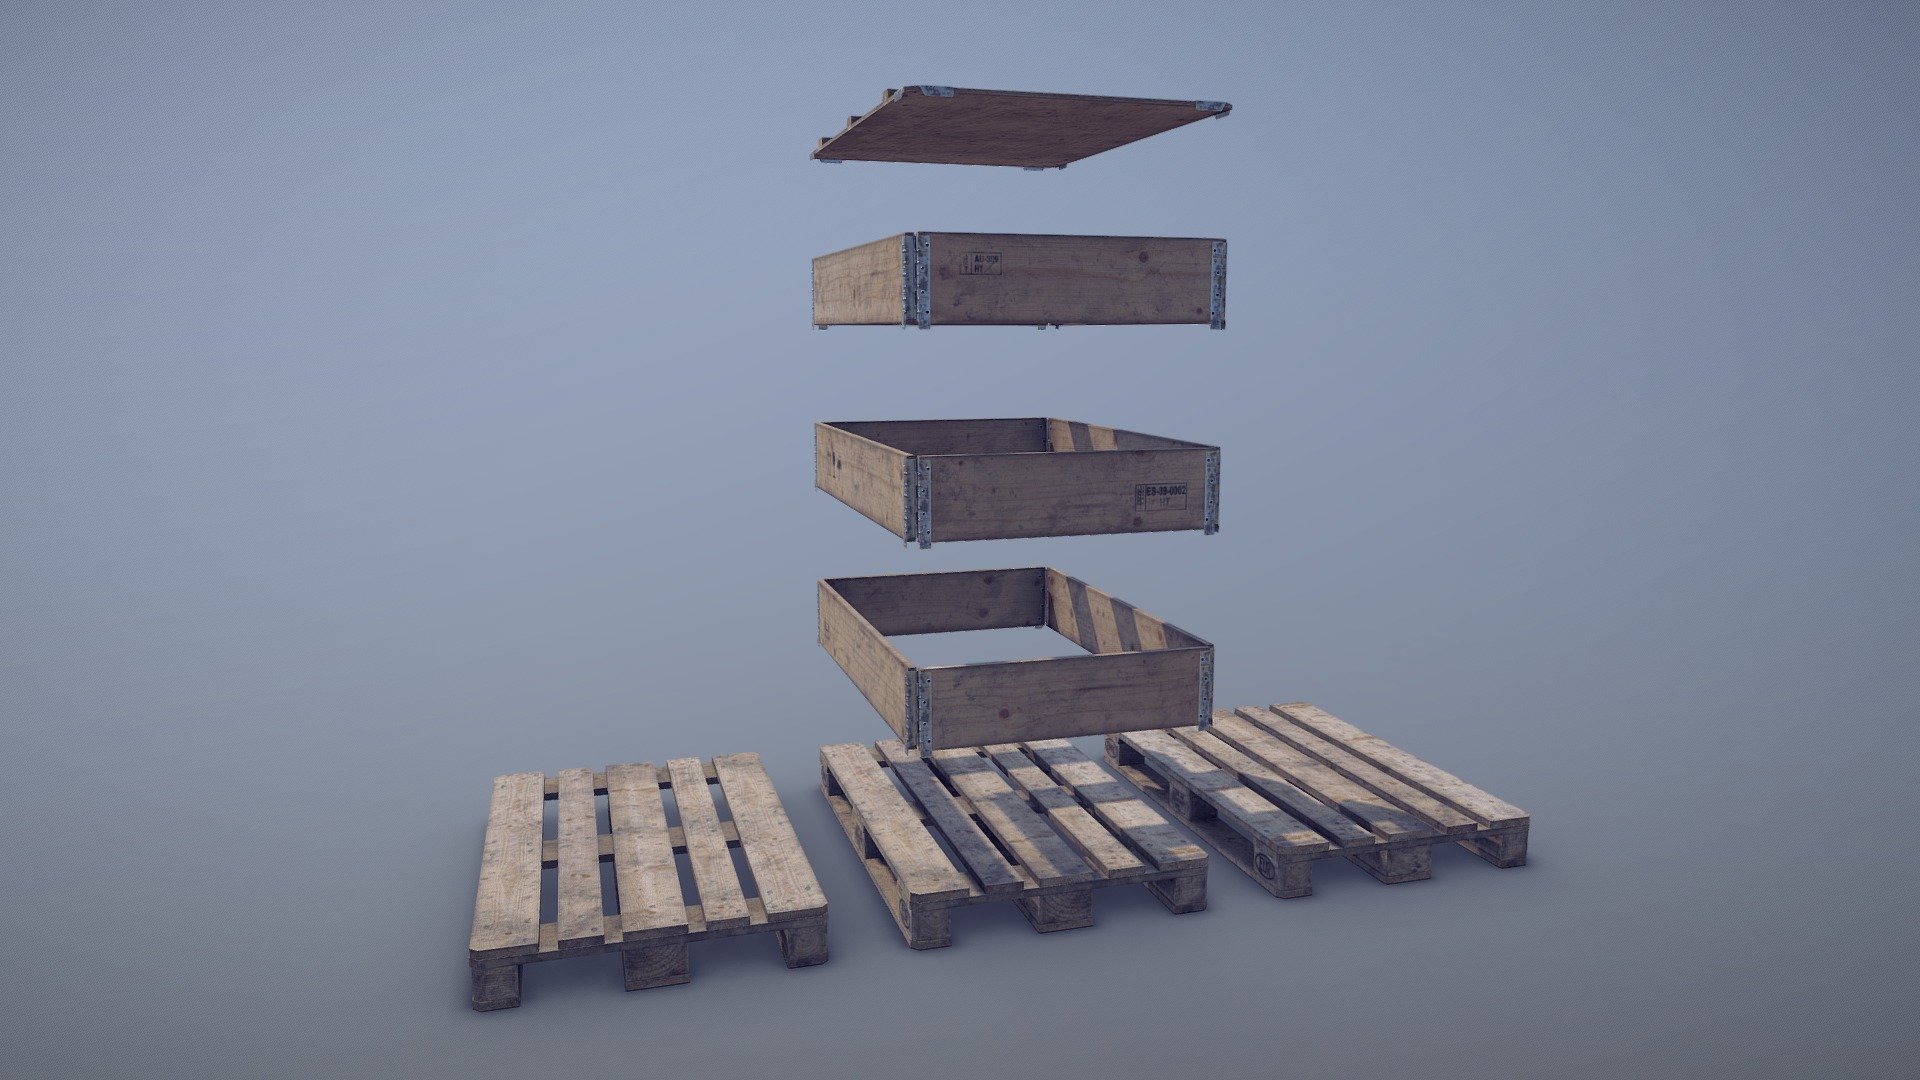 Cargo Wood Pallets Collars Cover EUR EPAL vr.2


LOD0 - (triangles 1718) / (points 1144)
LOD1 - (triangles 656) / (points 553)
LOD2 - (triangles 136) / (points 192)

Low-poly 3D model Cargo Wood Pallets Collars Cover EUR EPAL with LODs 
- (three variations for Pallets) +  (three variations for Pallet Collars) + (Cover)  (size 1200mm - 800mm - 145mm)
- (texture vr.2 - &ldquo;dirty pallets